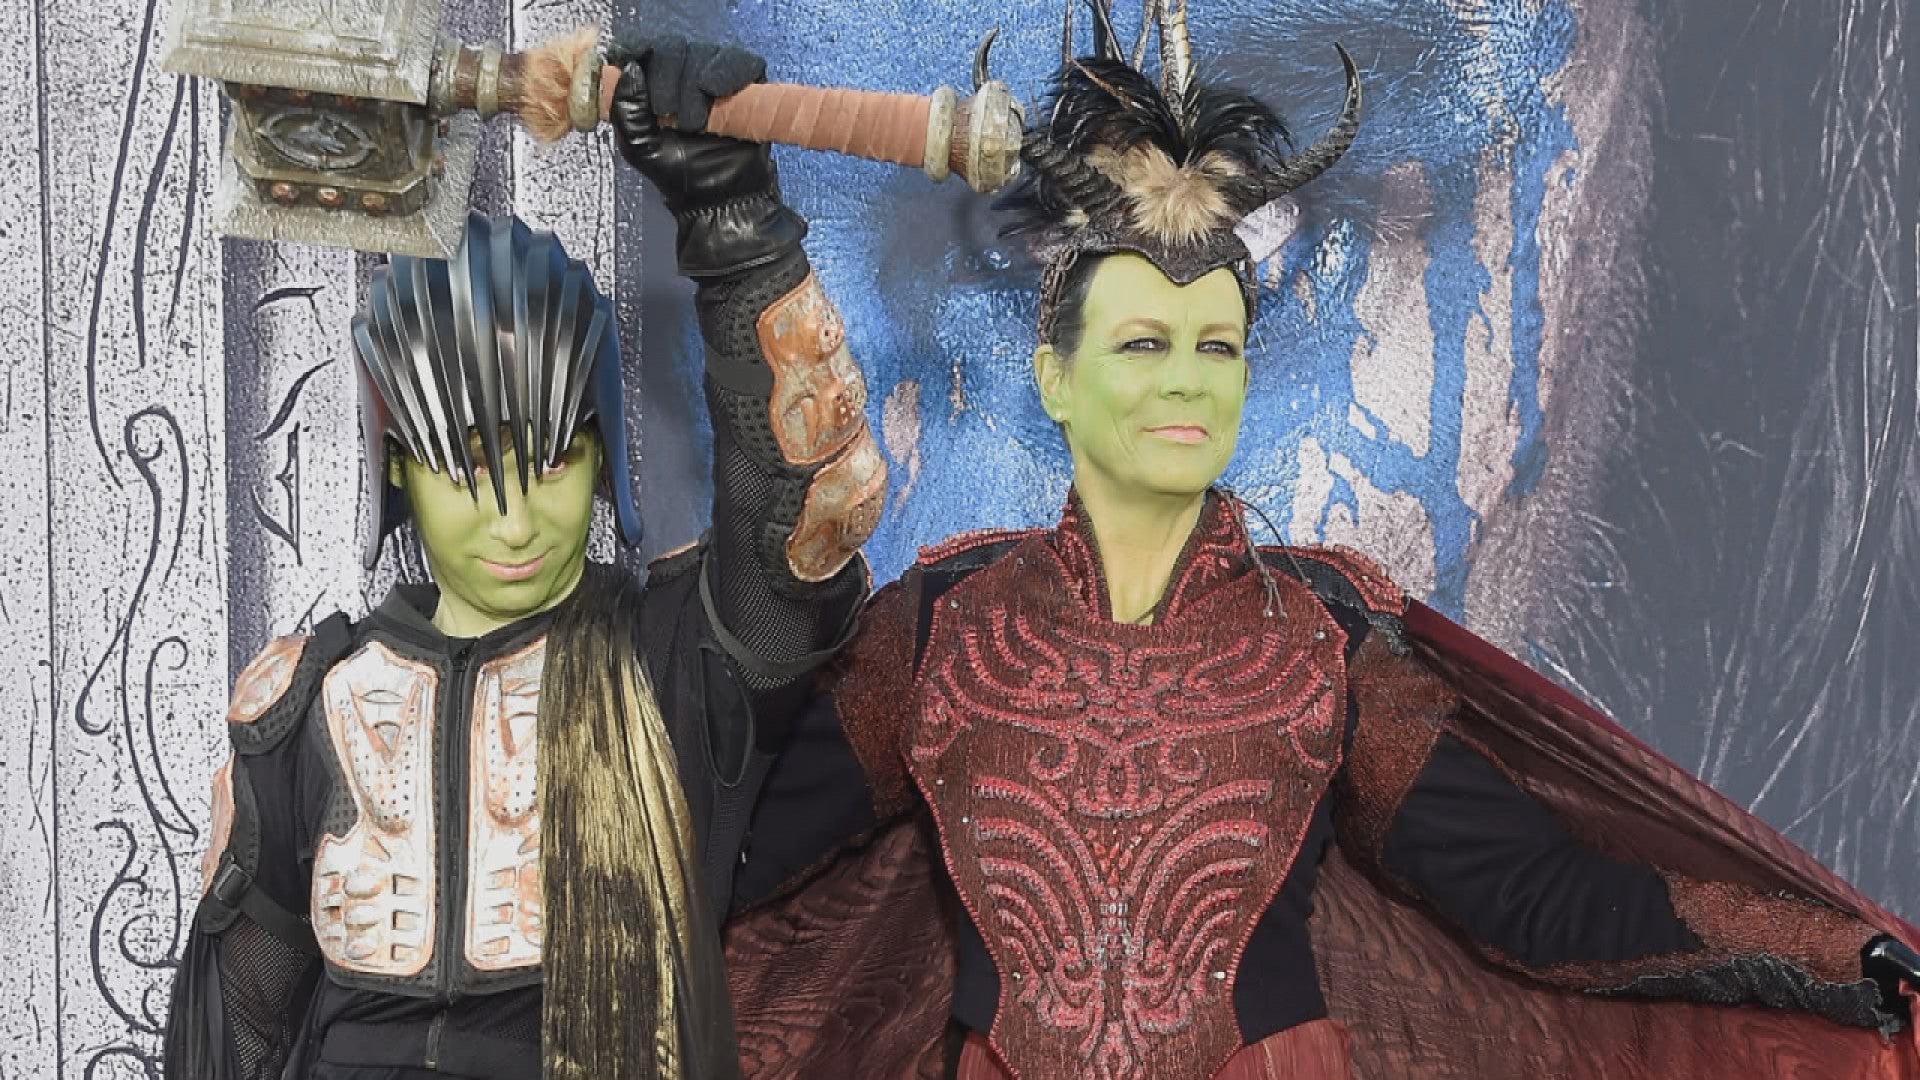 EXCLUSIVE: Jamie Lee Curtis and Son Cosplay at 'Warcraft' Premiere in Full  Makeup: 'We're Serious About Our Ga | Entertainment Tonight